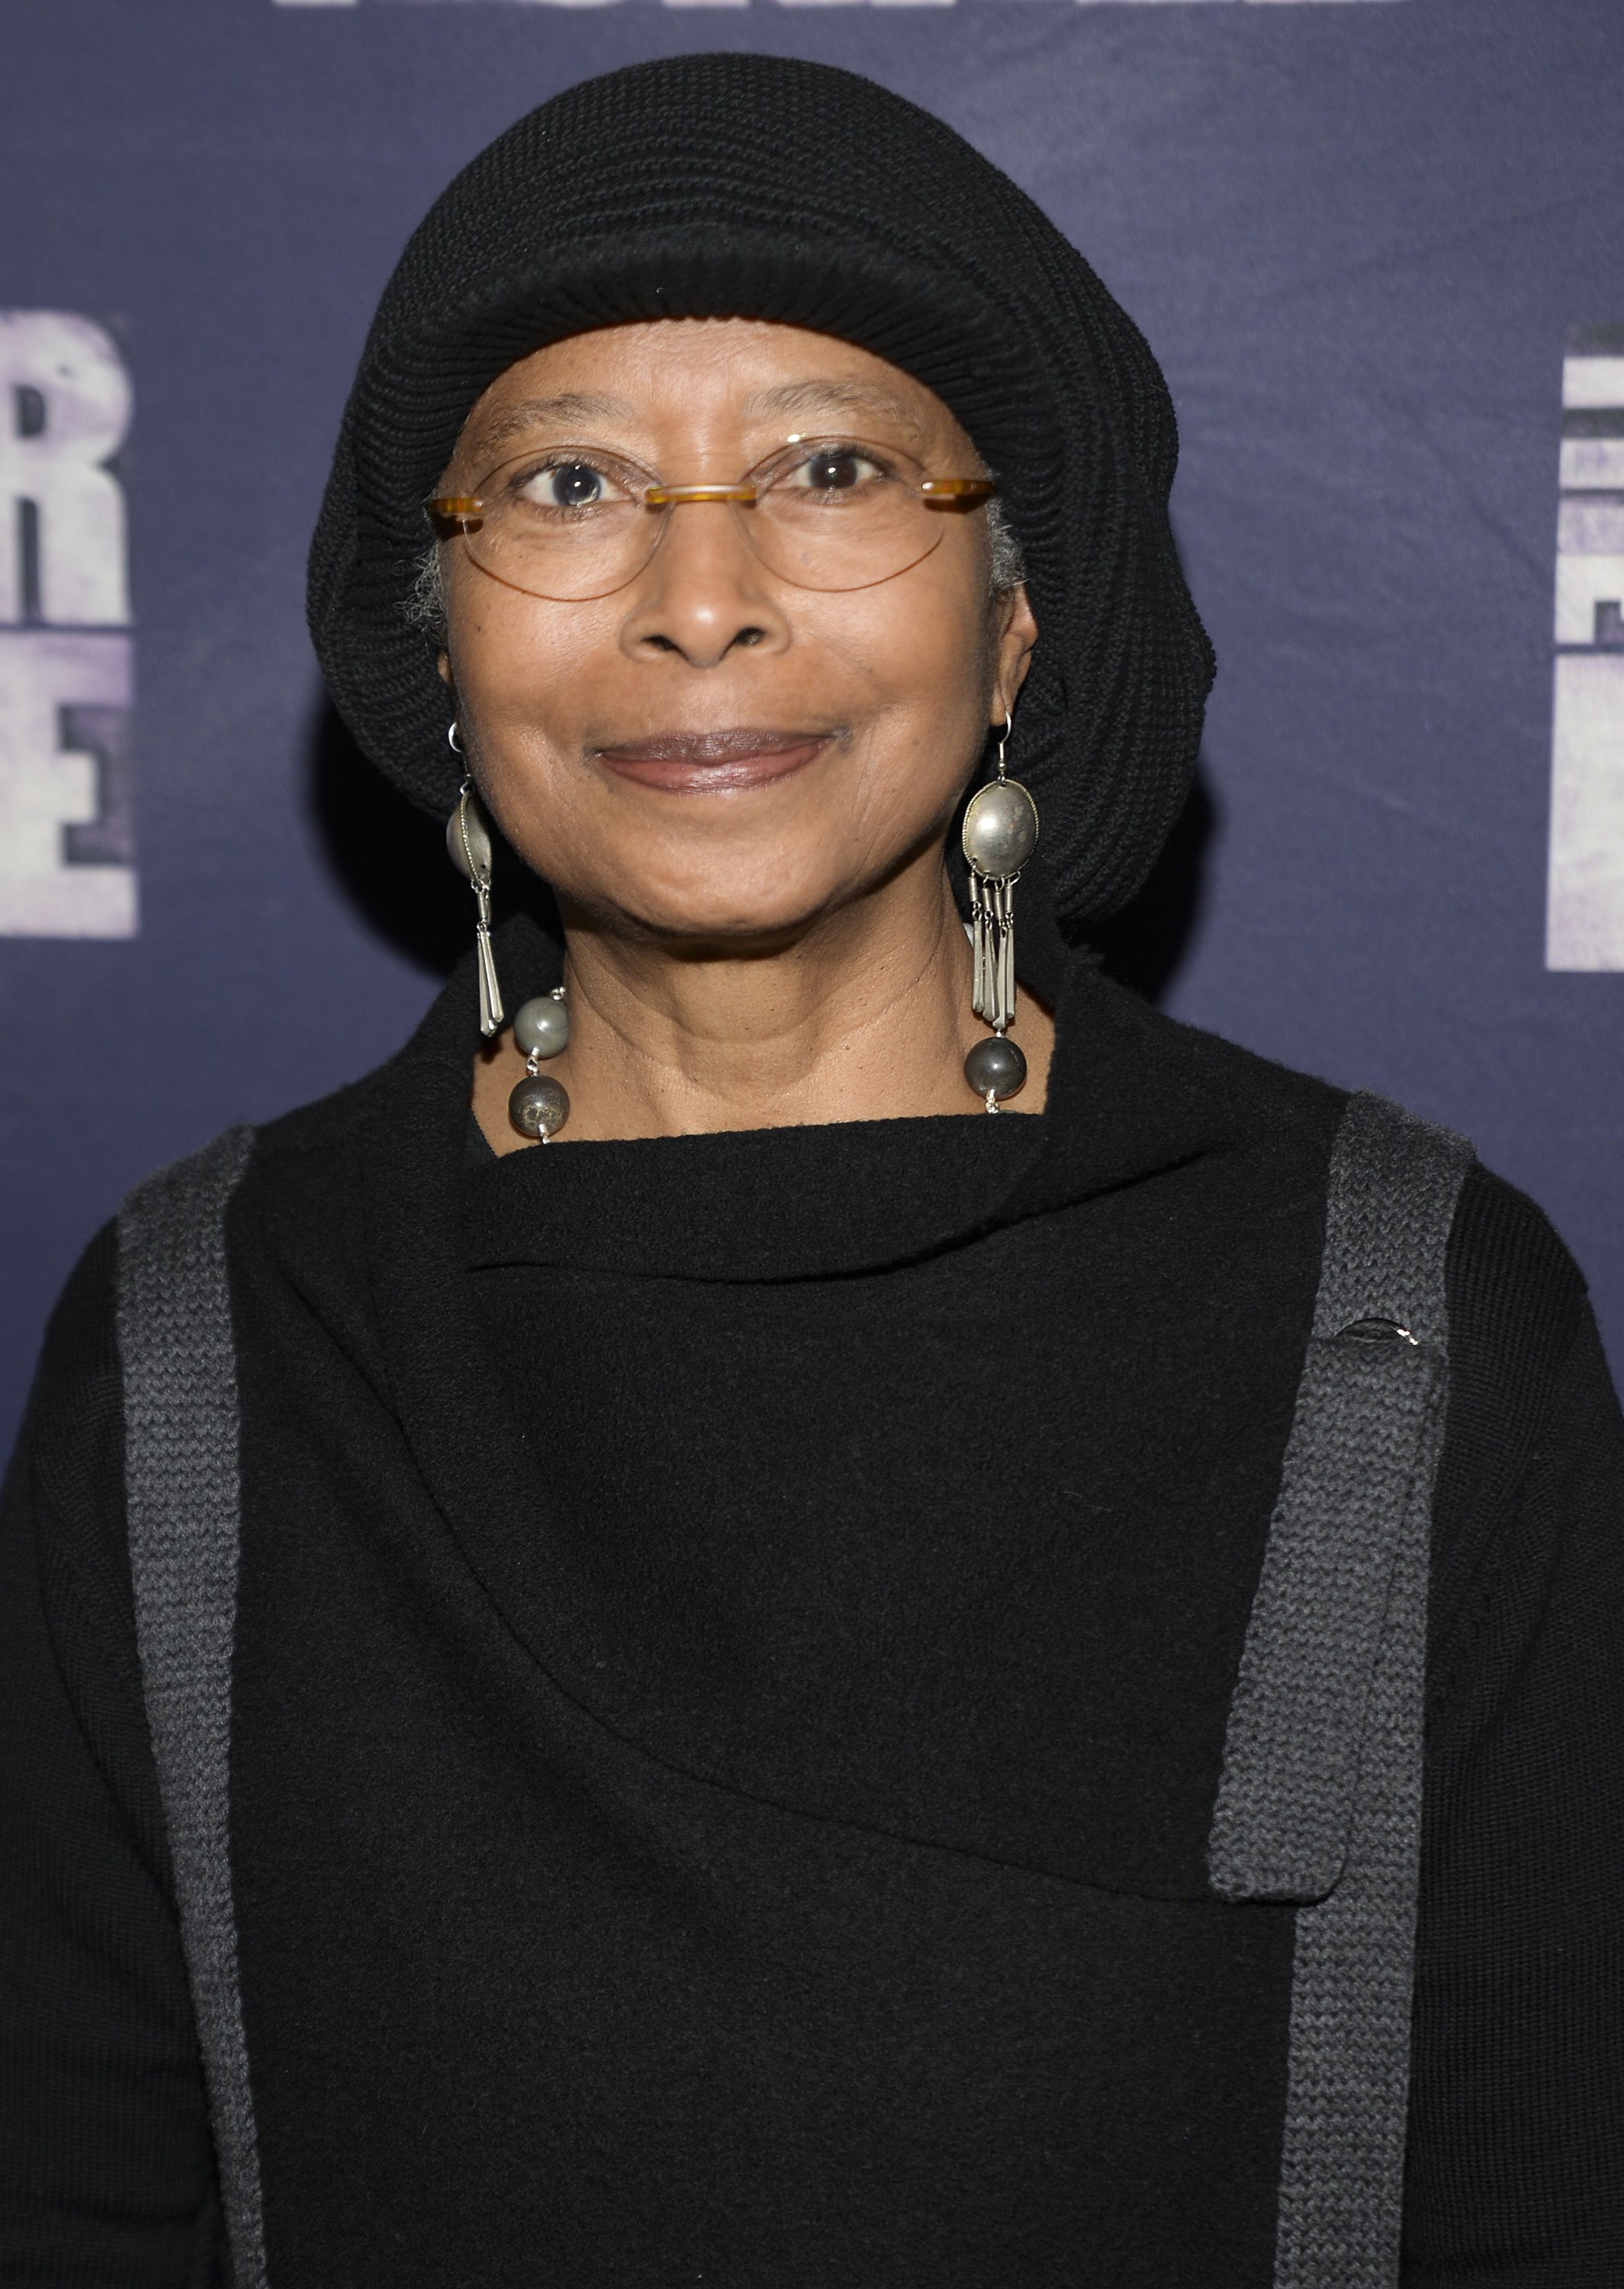  Alice Walker attends "The Color Purple" Broadway opening night at the Bernard B. Jacobs Theatre on December 10, 2015 | Photo: GettyImages